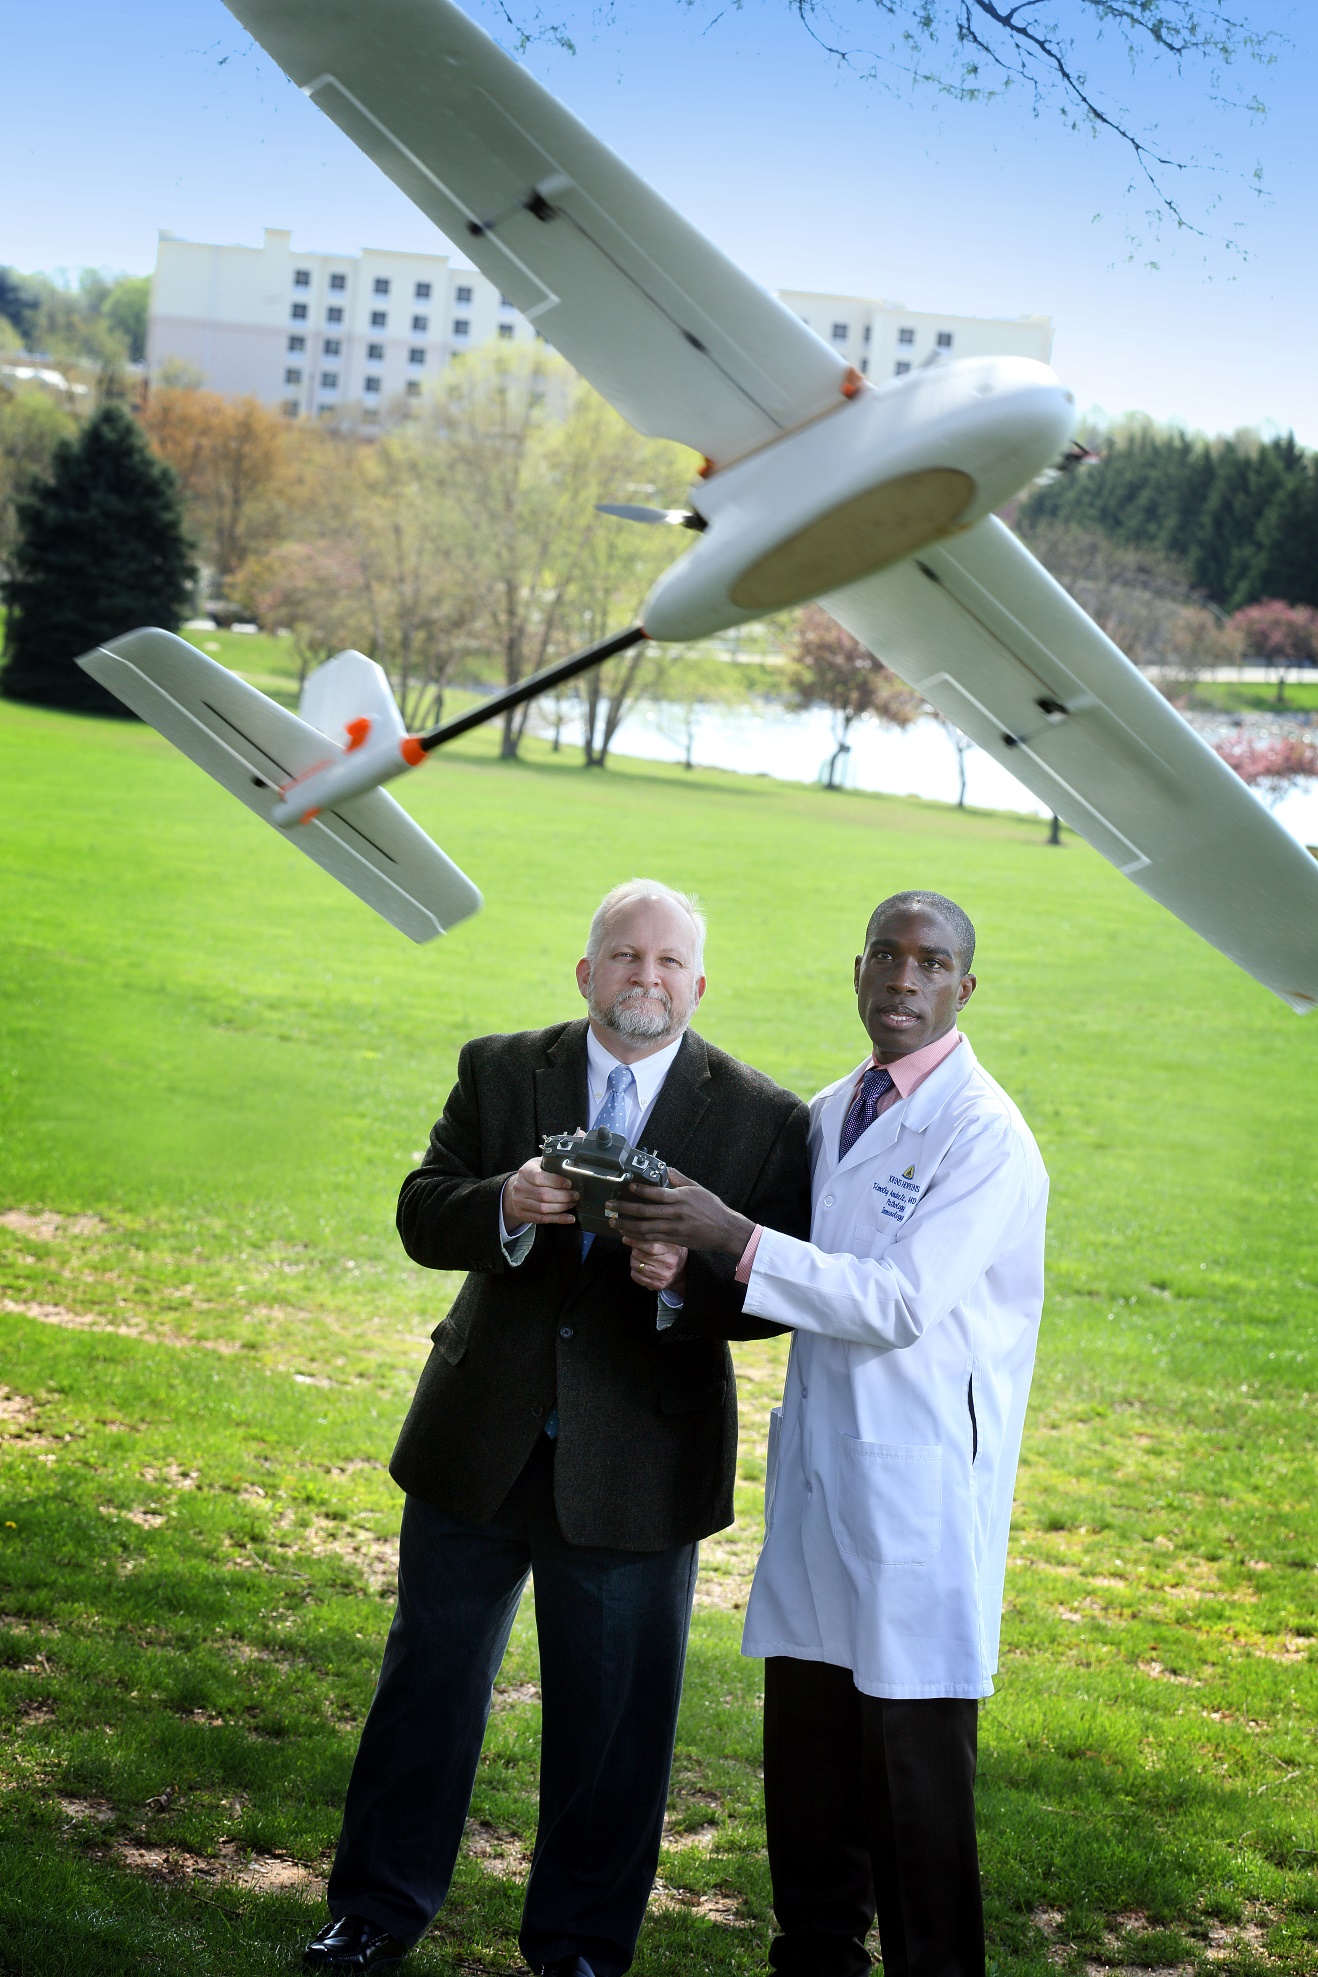 Pathologist Timothy Amukele teamed with Robert Chalmers and other engineers to create a drone courier system that transports blood to diagnostic laboratories. Johns Hopkins Medicine